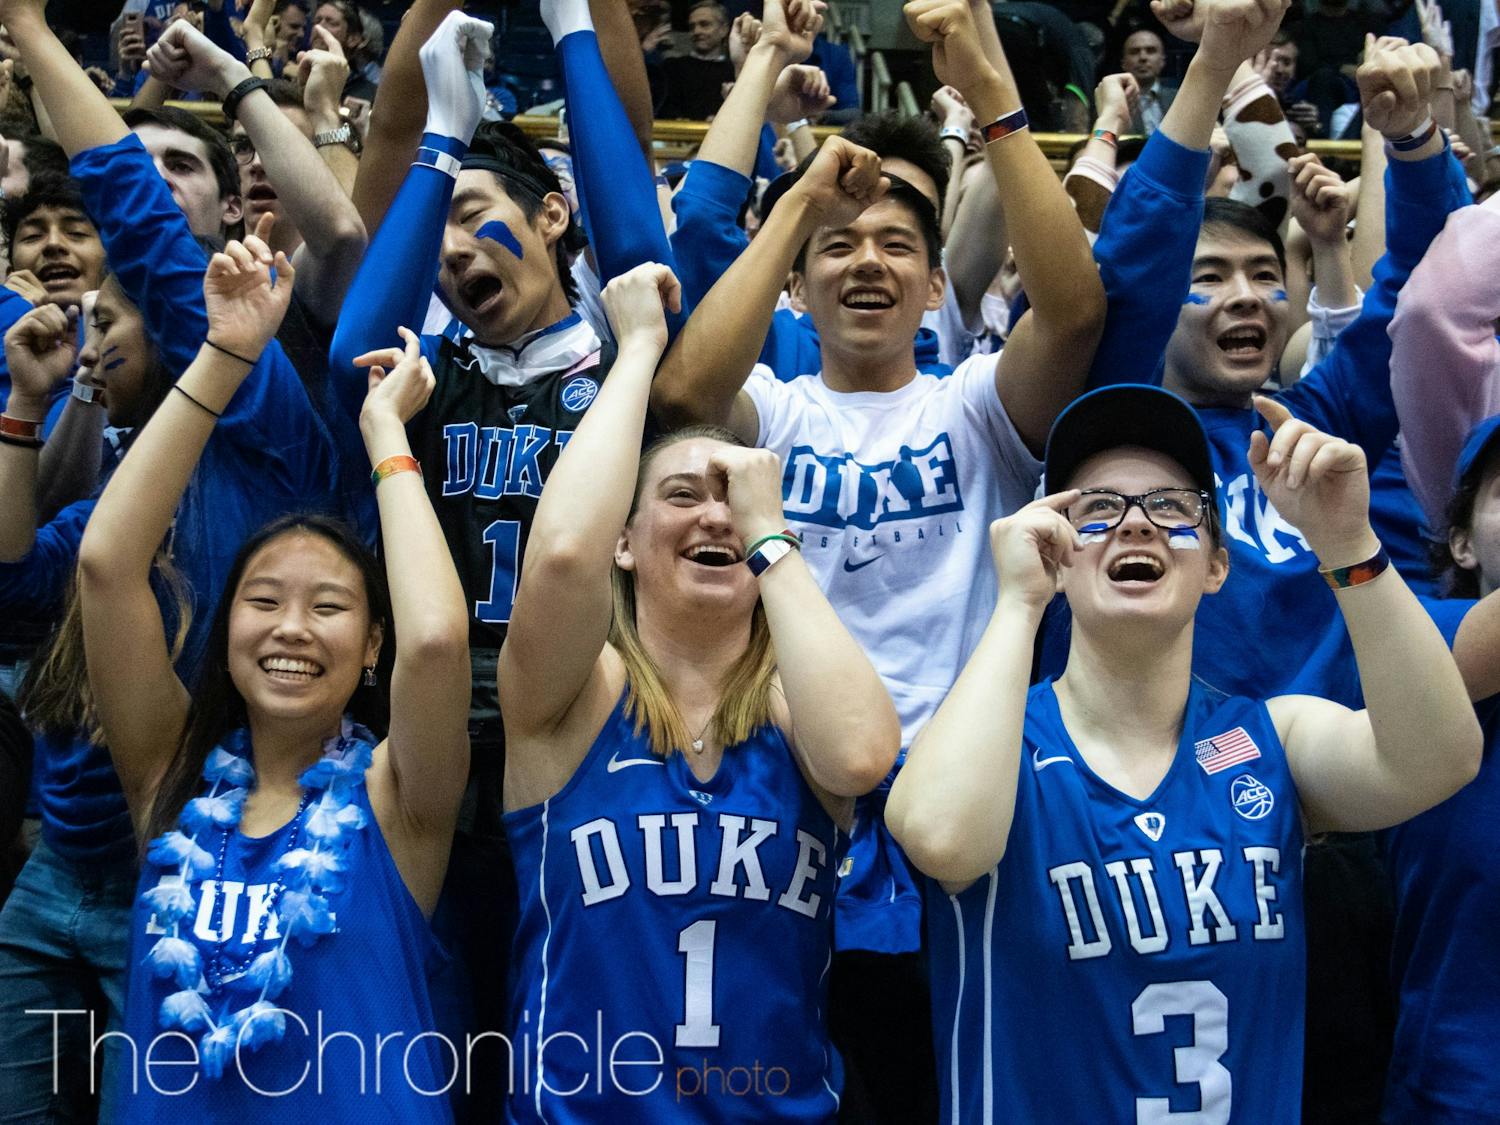 The Cameron Crazies waited out for tickets Sunday night to get a seat for Friday's Countdown to Craziness.